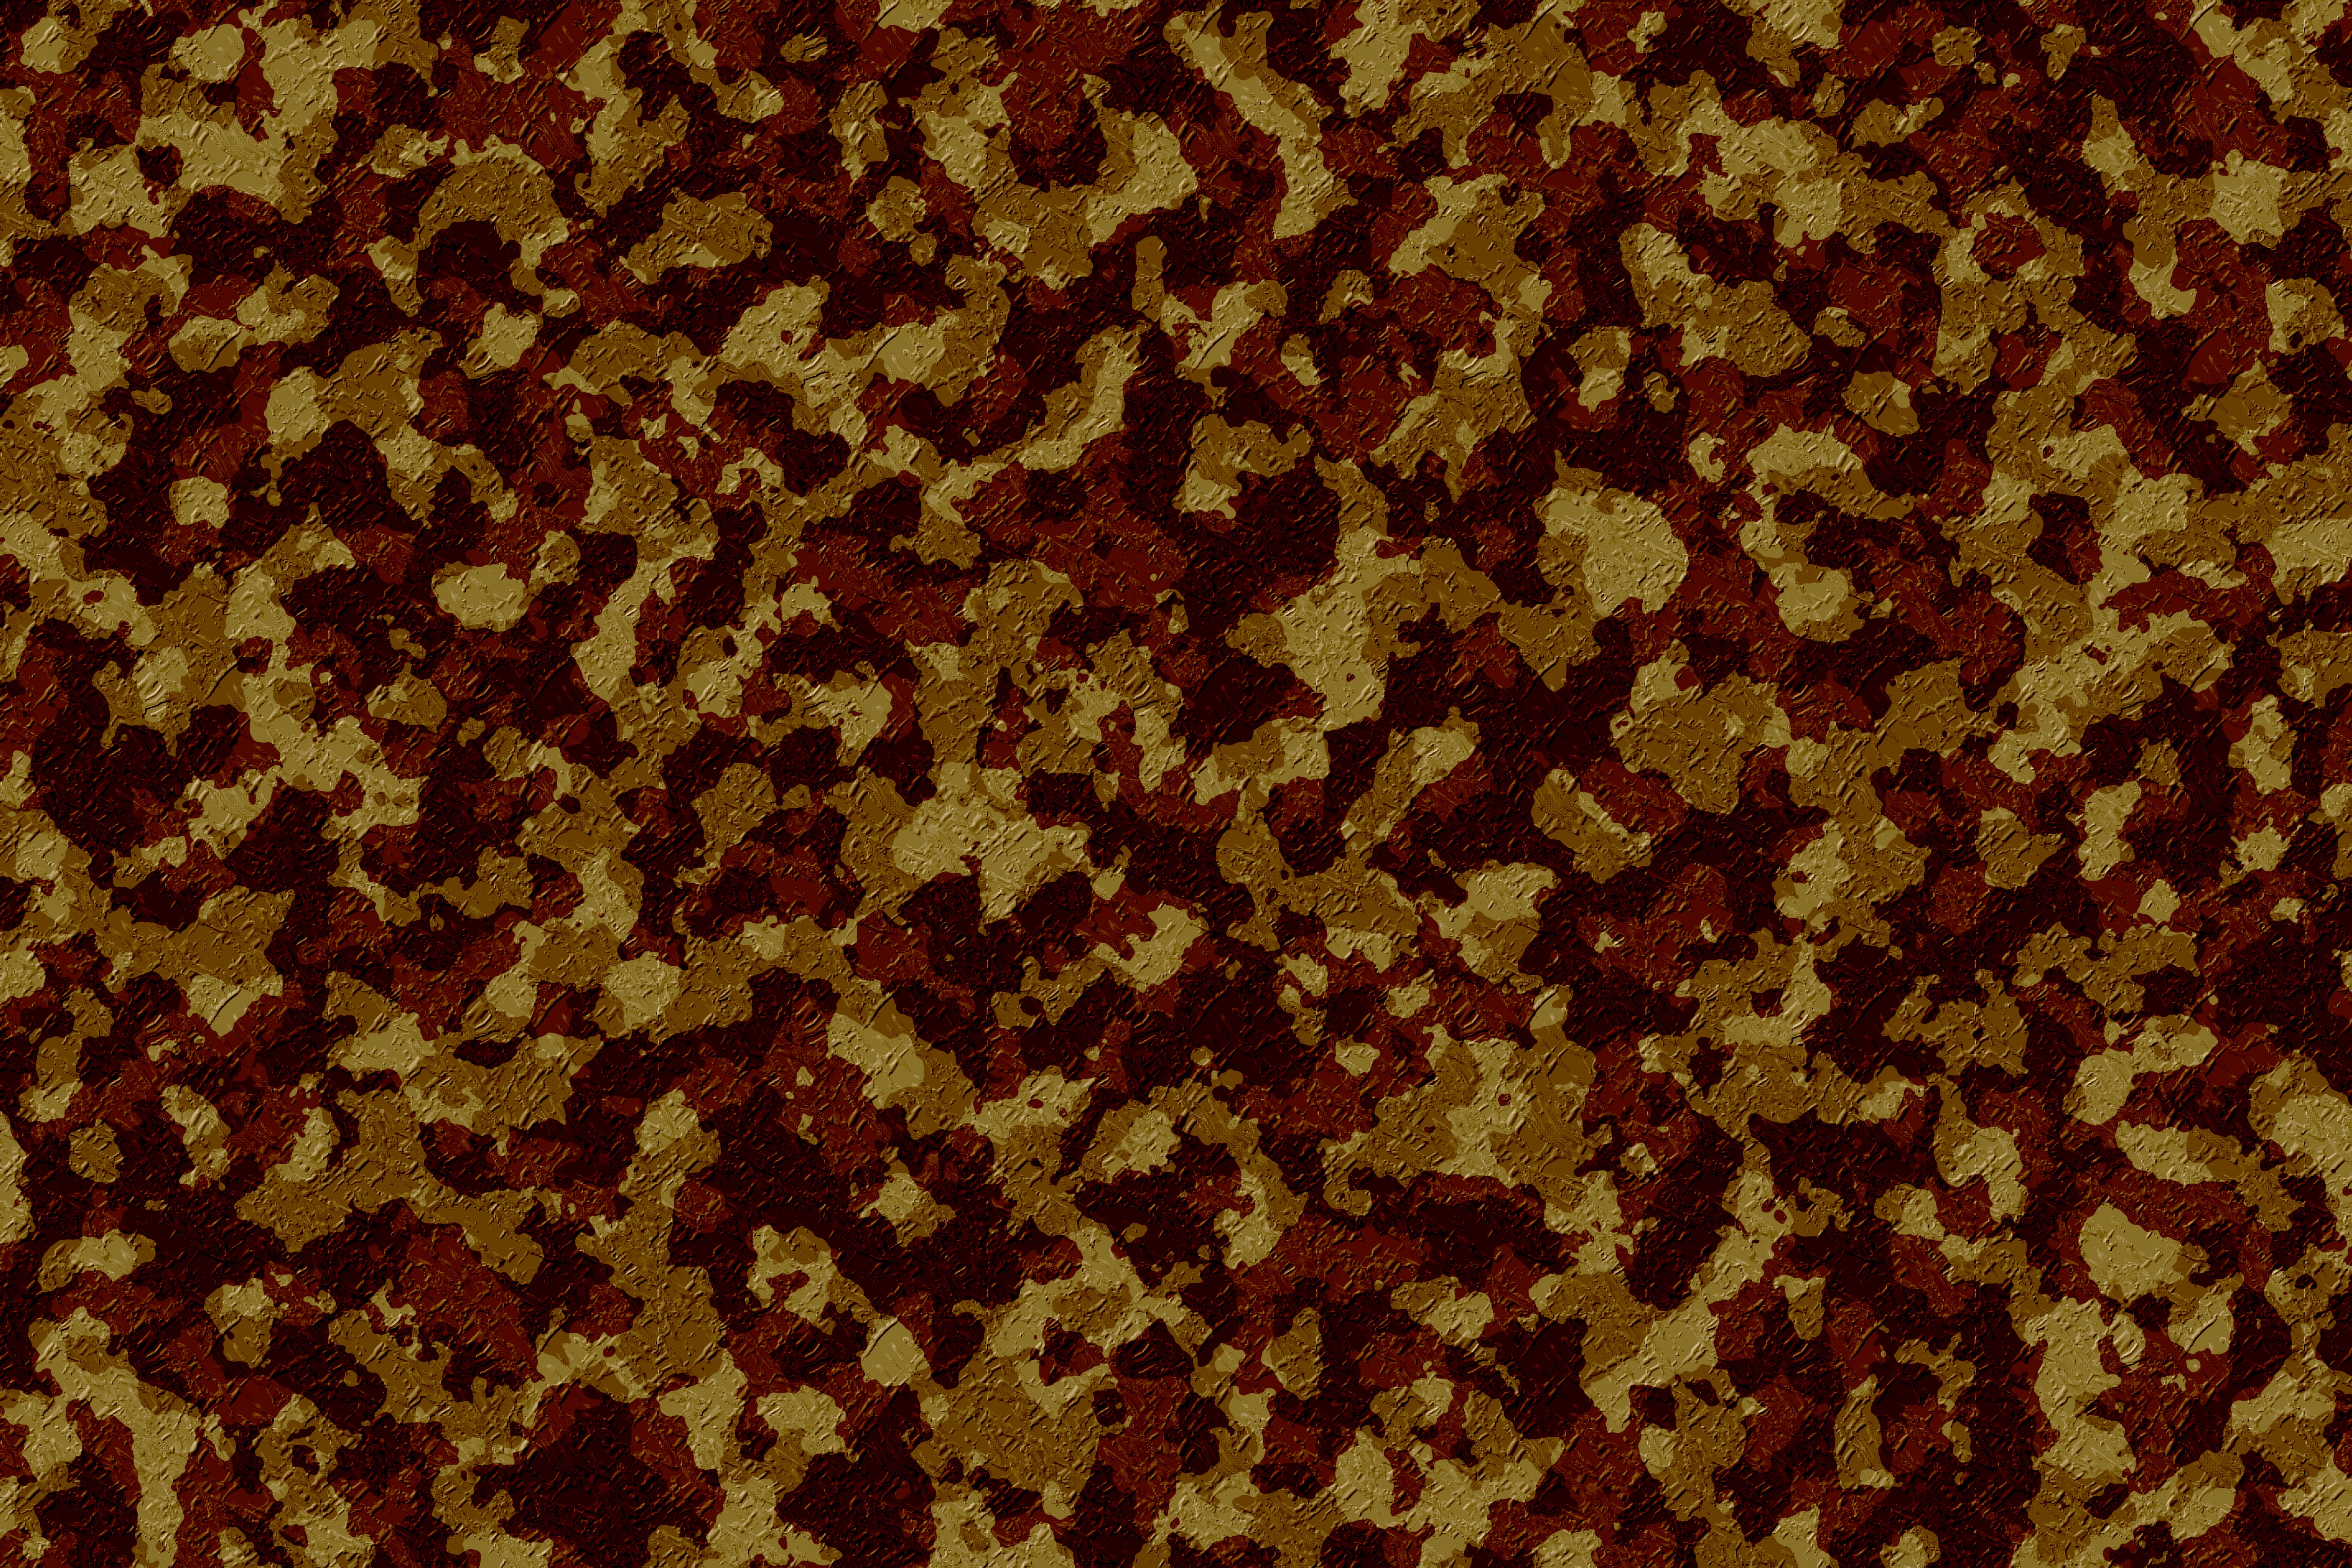 forest, pattern, texture, textures, stains, spots, disguise, camouflage